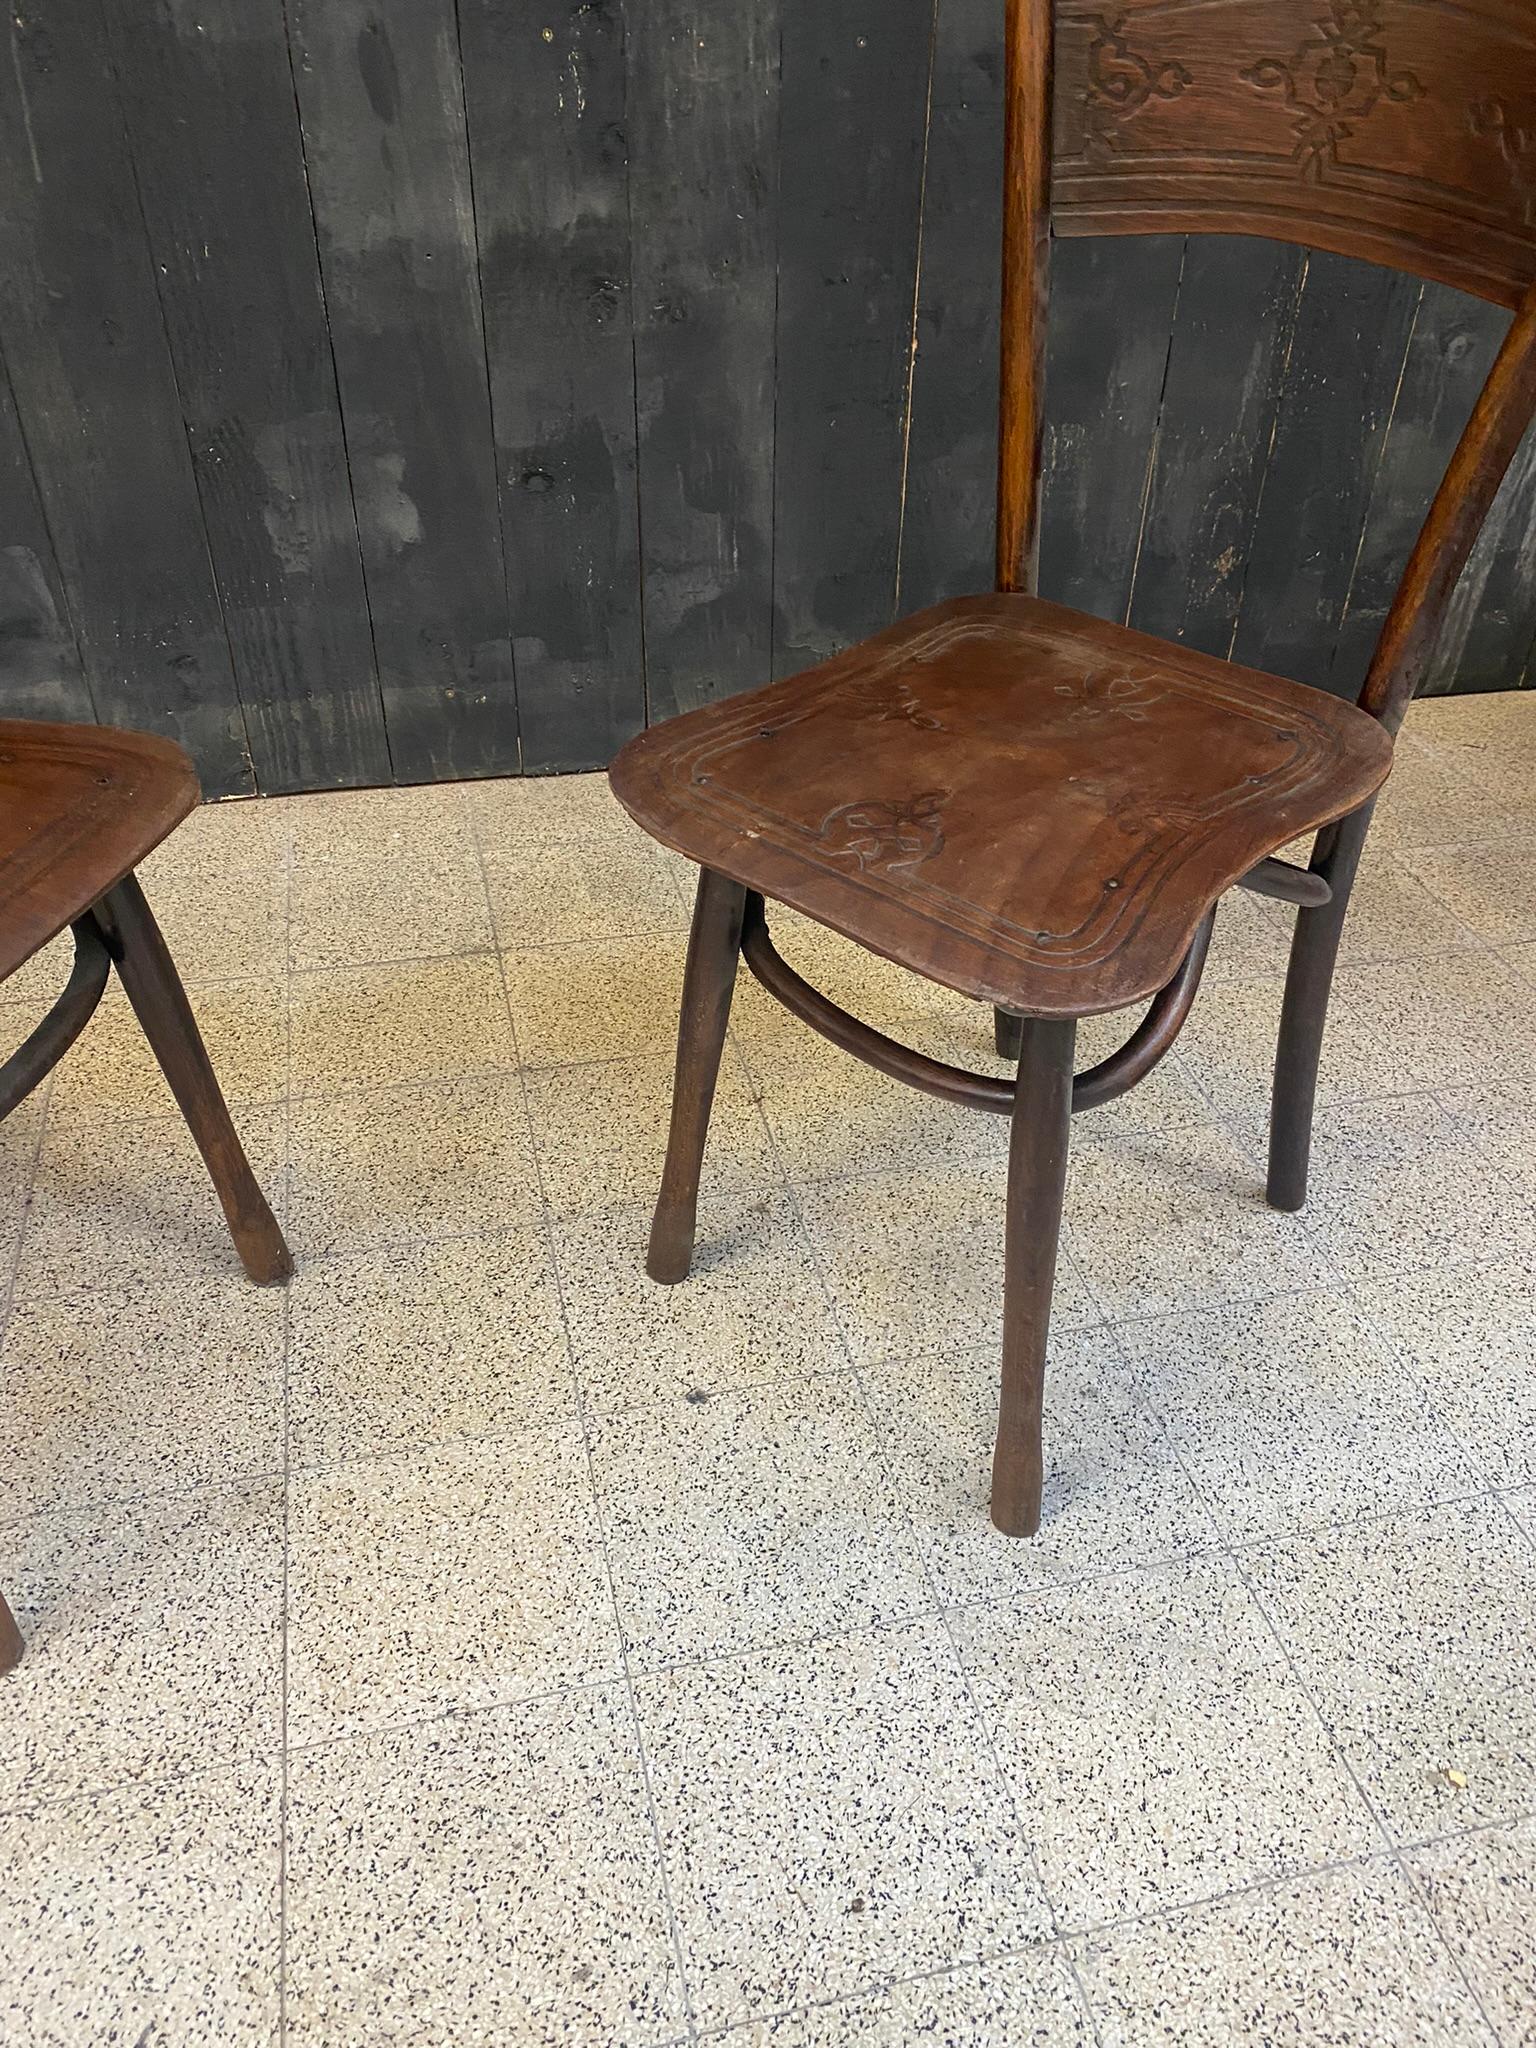 4 Antique Chairs from Jacob & Josef Kohn, circa 1900 For Sale 2